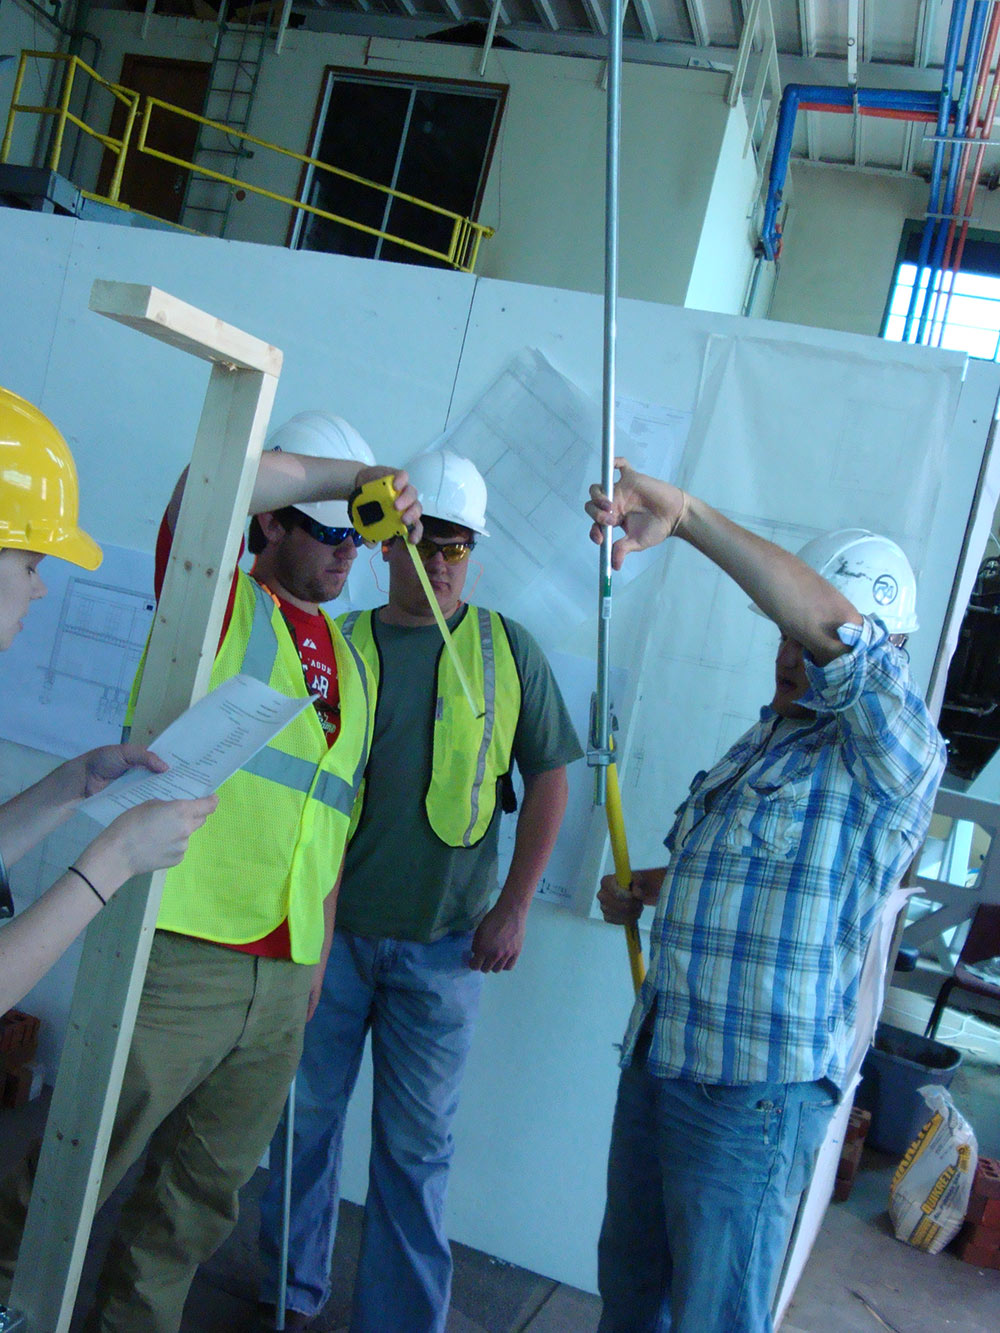 group in hart hats works on construction project - measuring